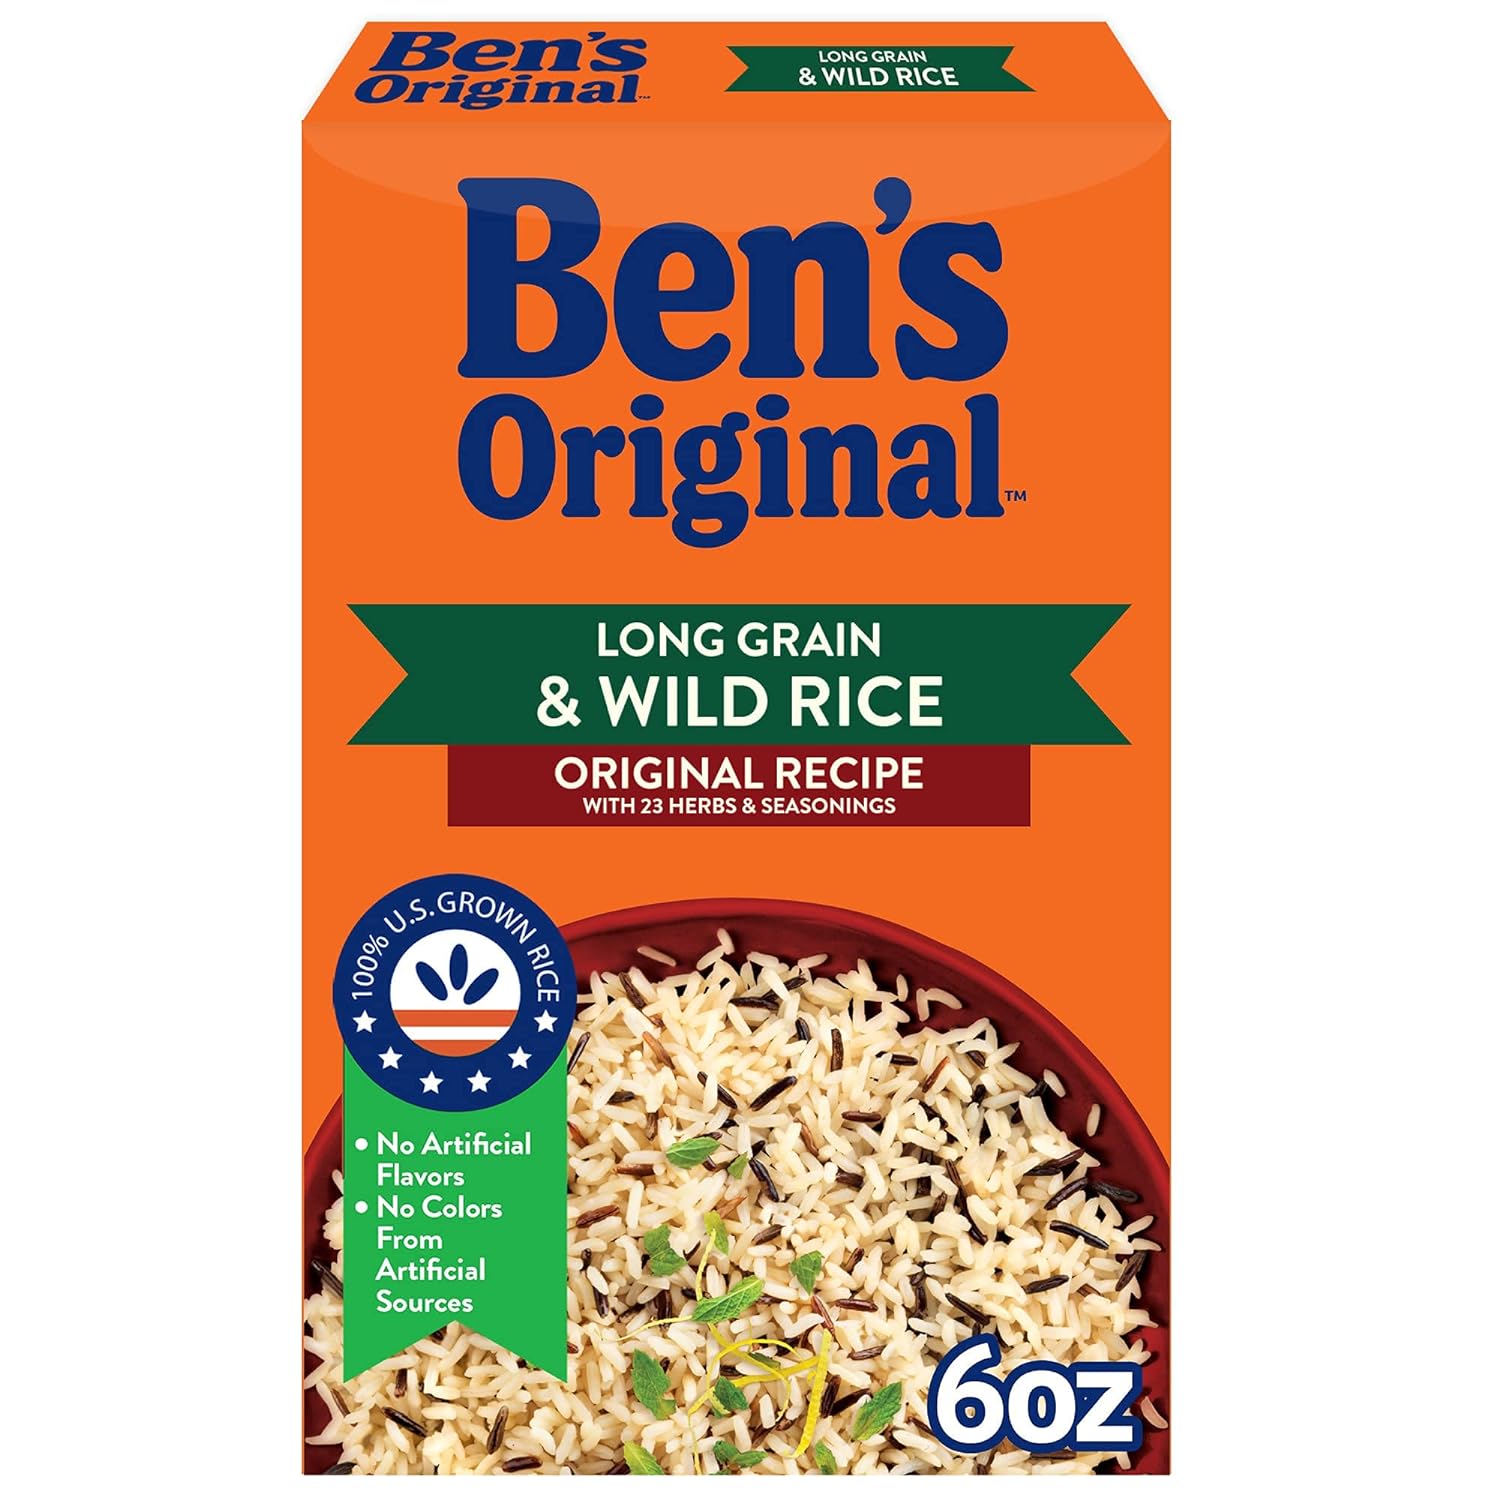 Ever since I had c-ovid in 2020 it seems like my sense of taste is not as good. Most things I eat dont taste the same. My wife bought the Bens rice in the microwave package. It also had little to no taste. I thought maybe, just maybe, its different than the boxed rice. IT WAS !!!The boxed type had the full original flavor I remembered. I ordered 2 cases to make sure i had plenty👍